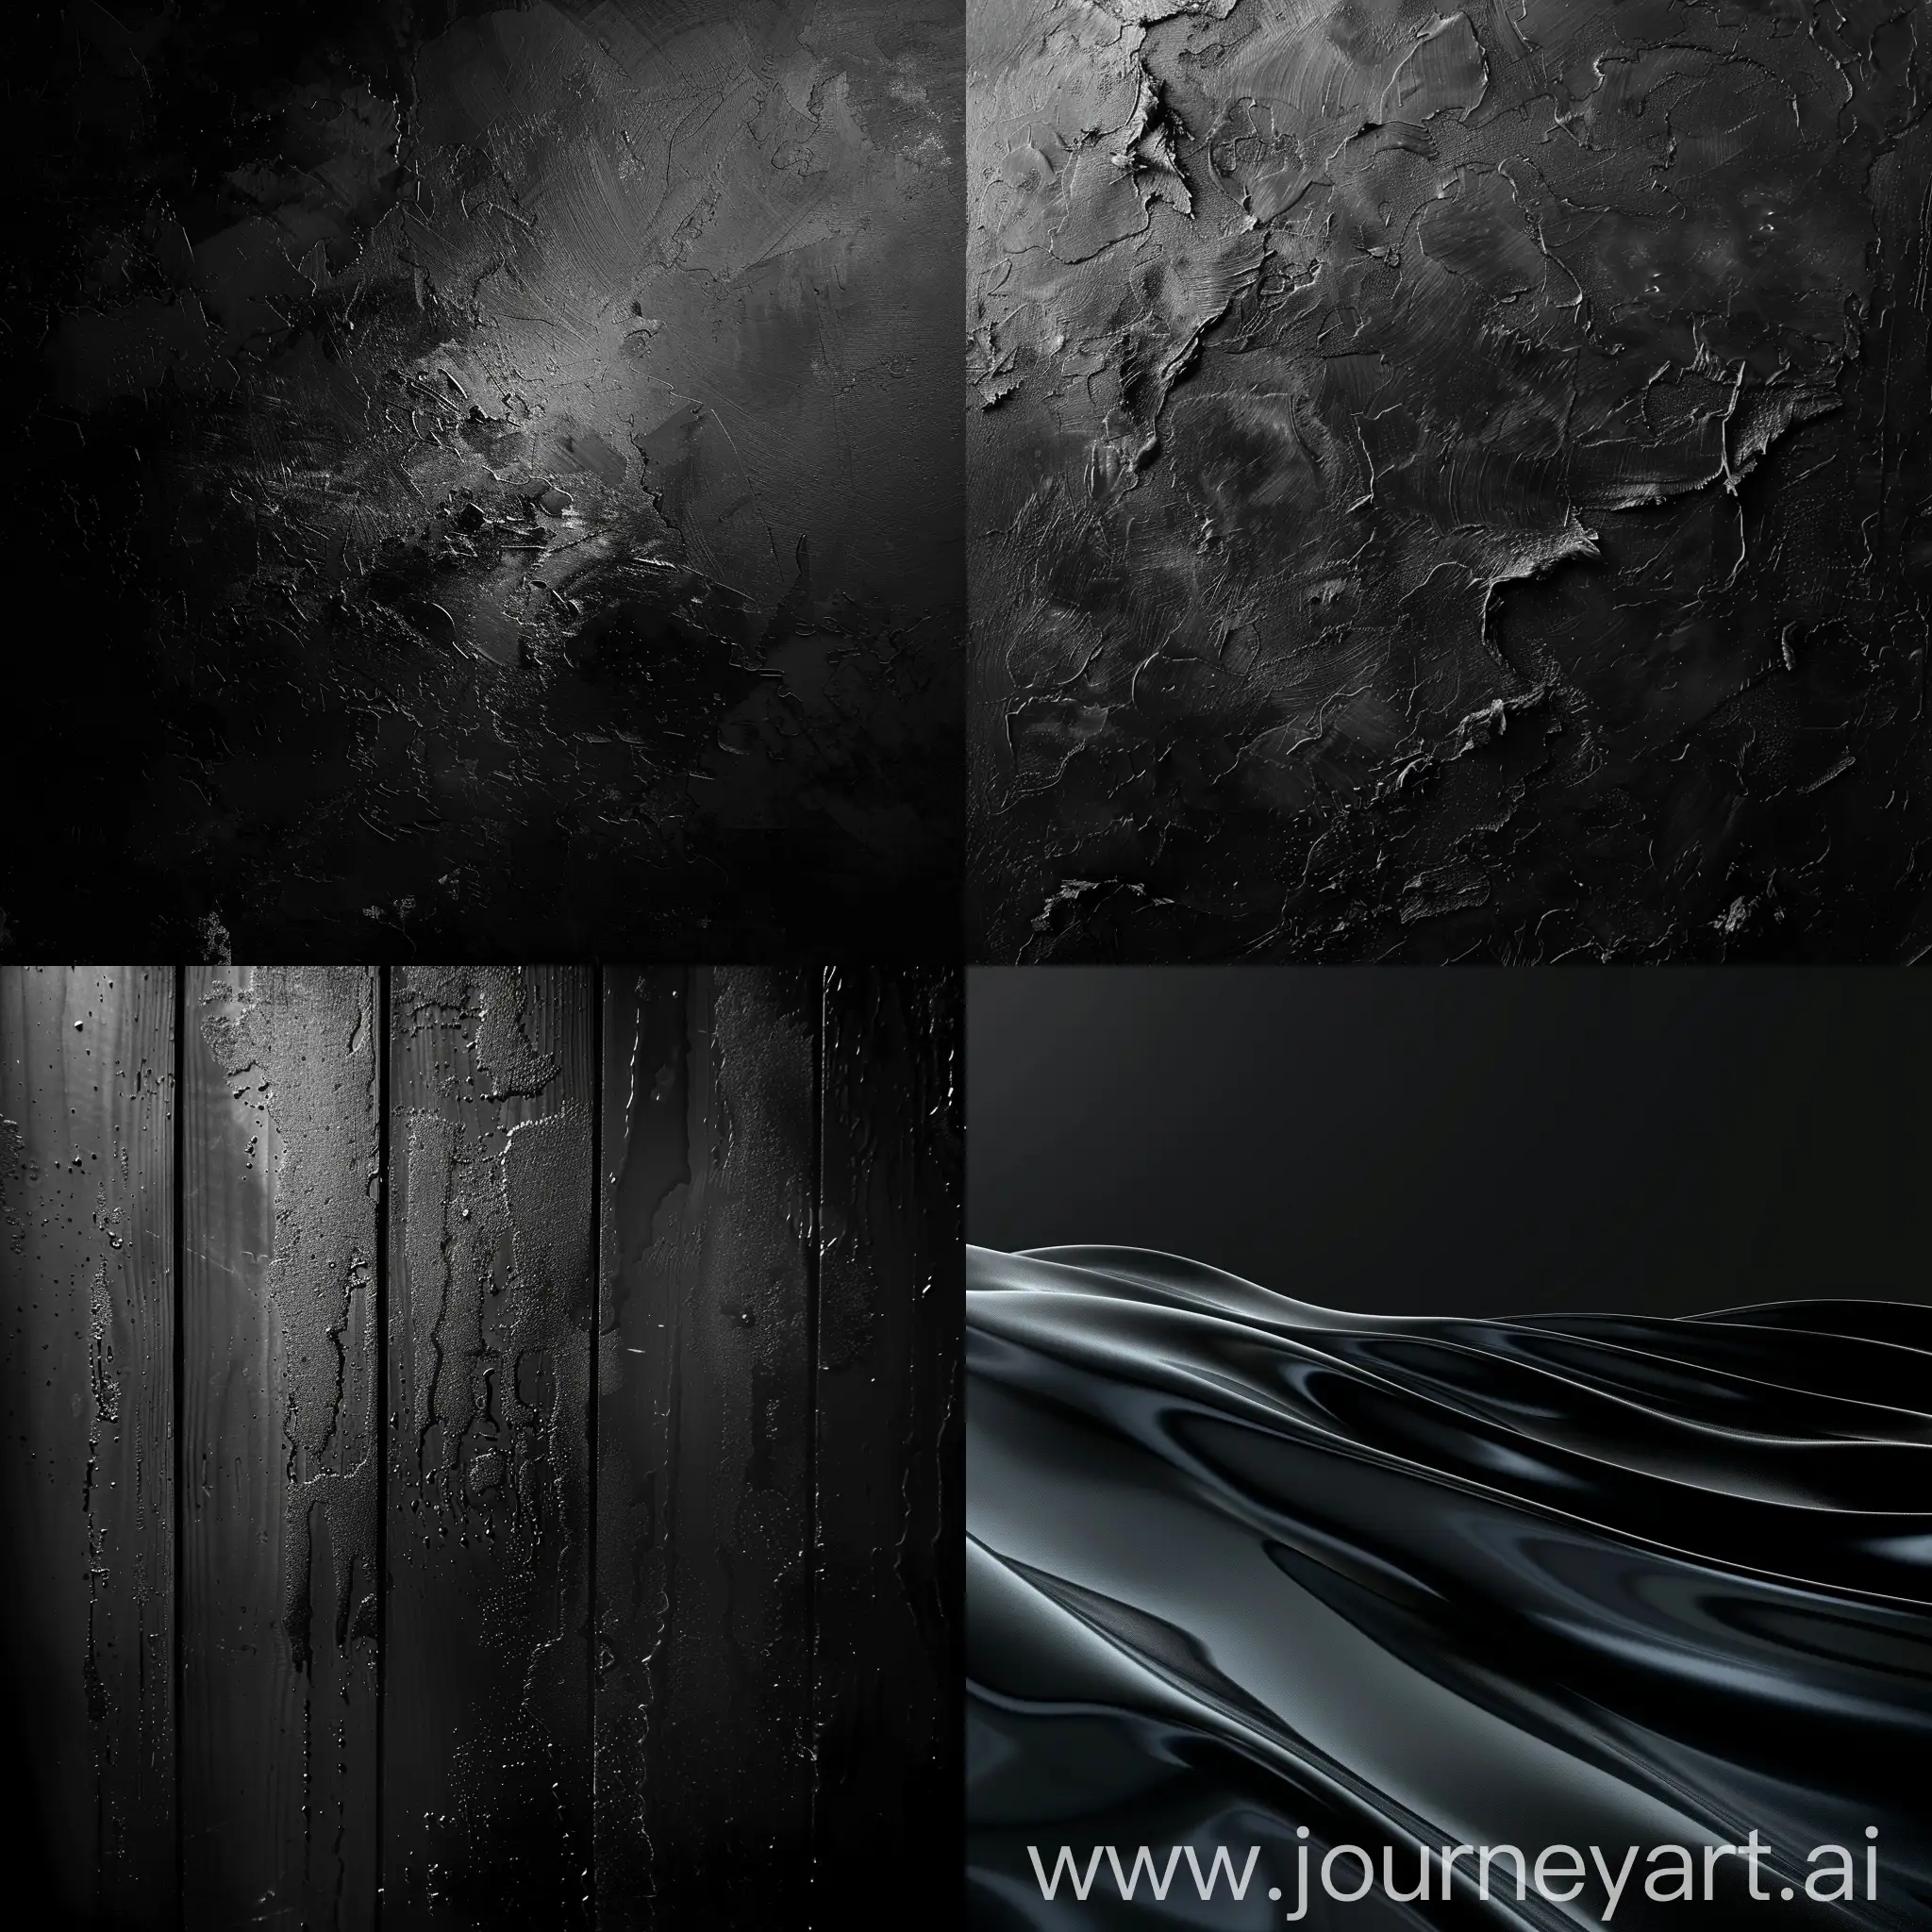 Monochrome-Abstract-Art-Tones-of-Black-in-Background